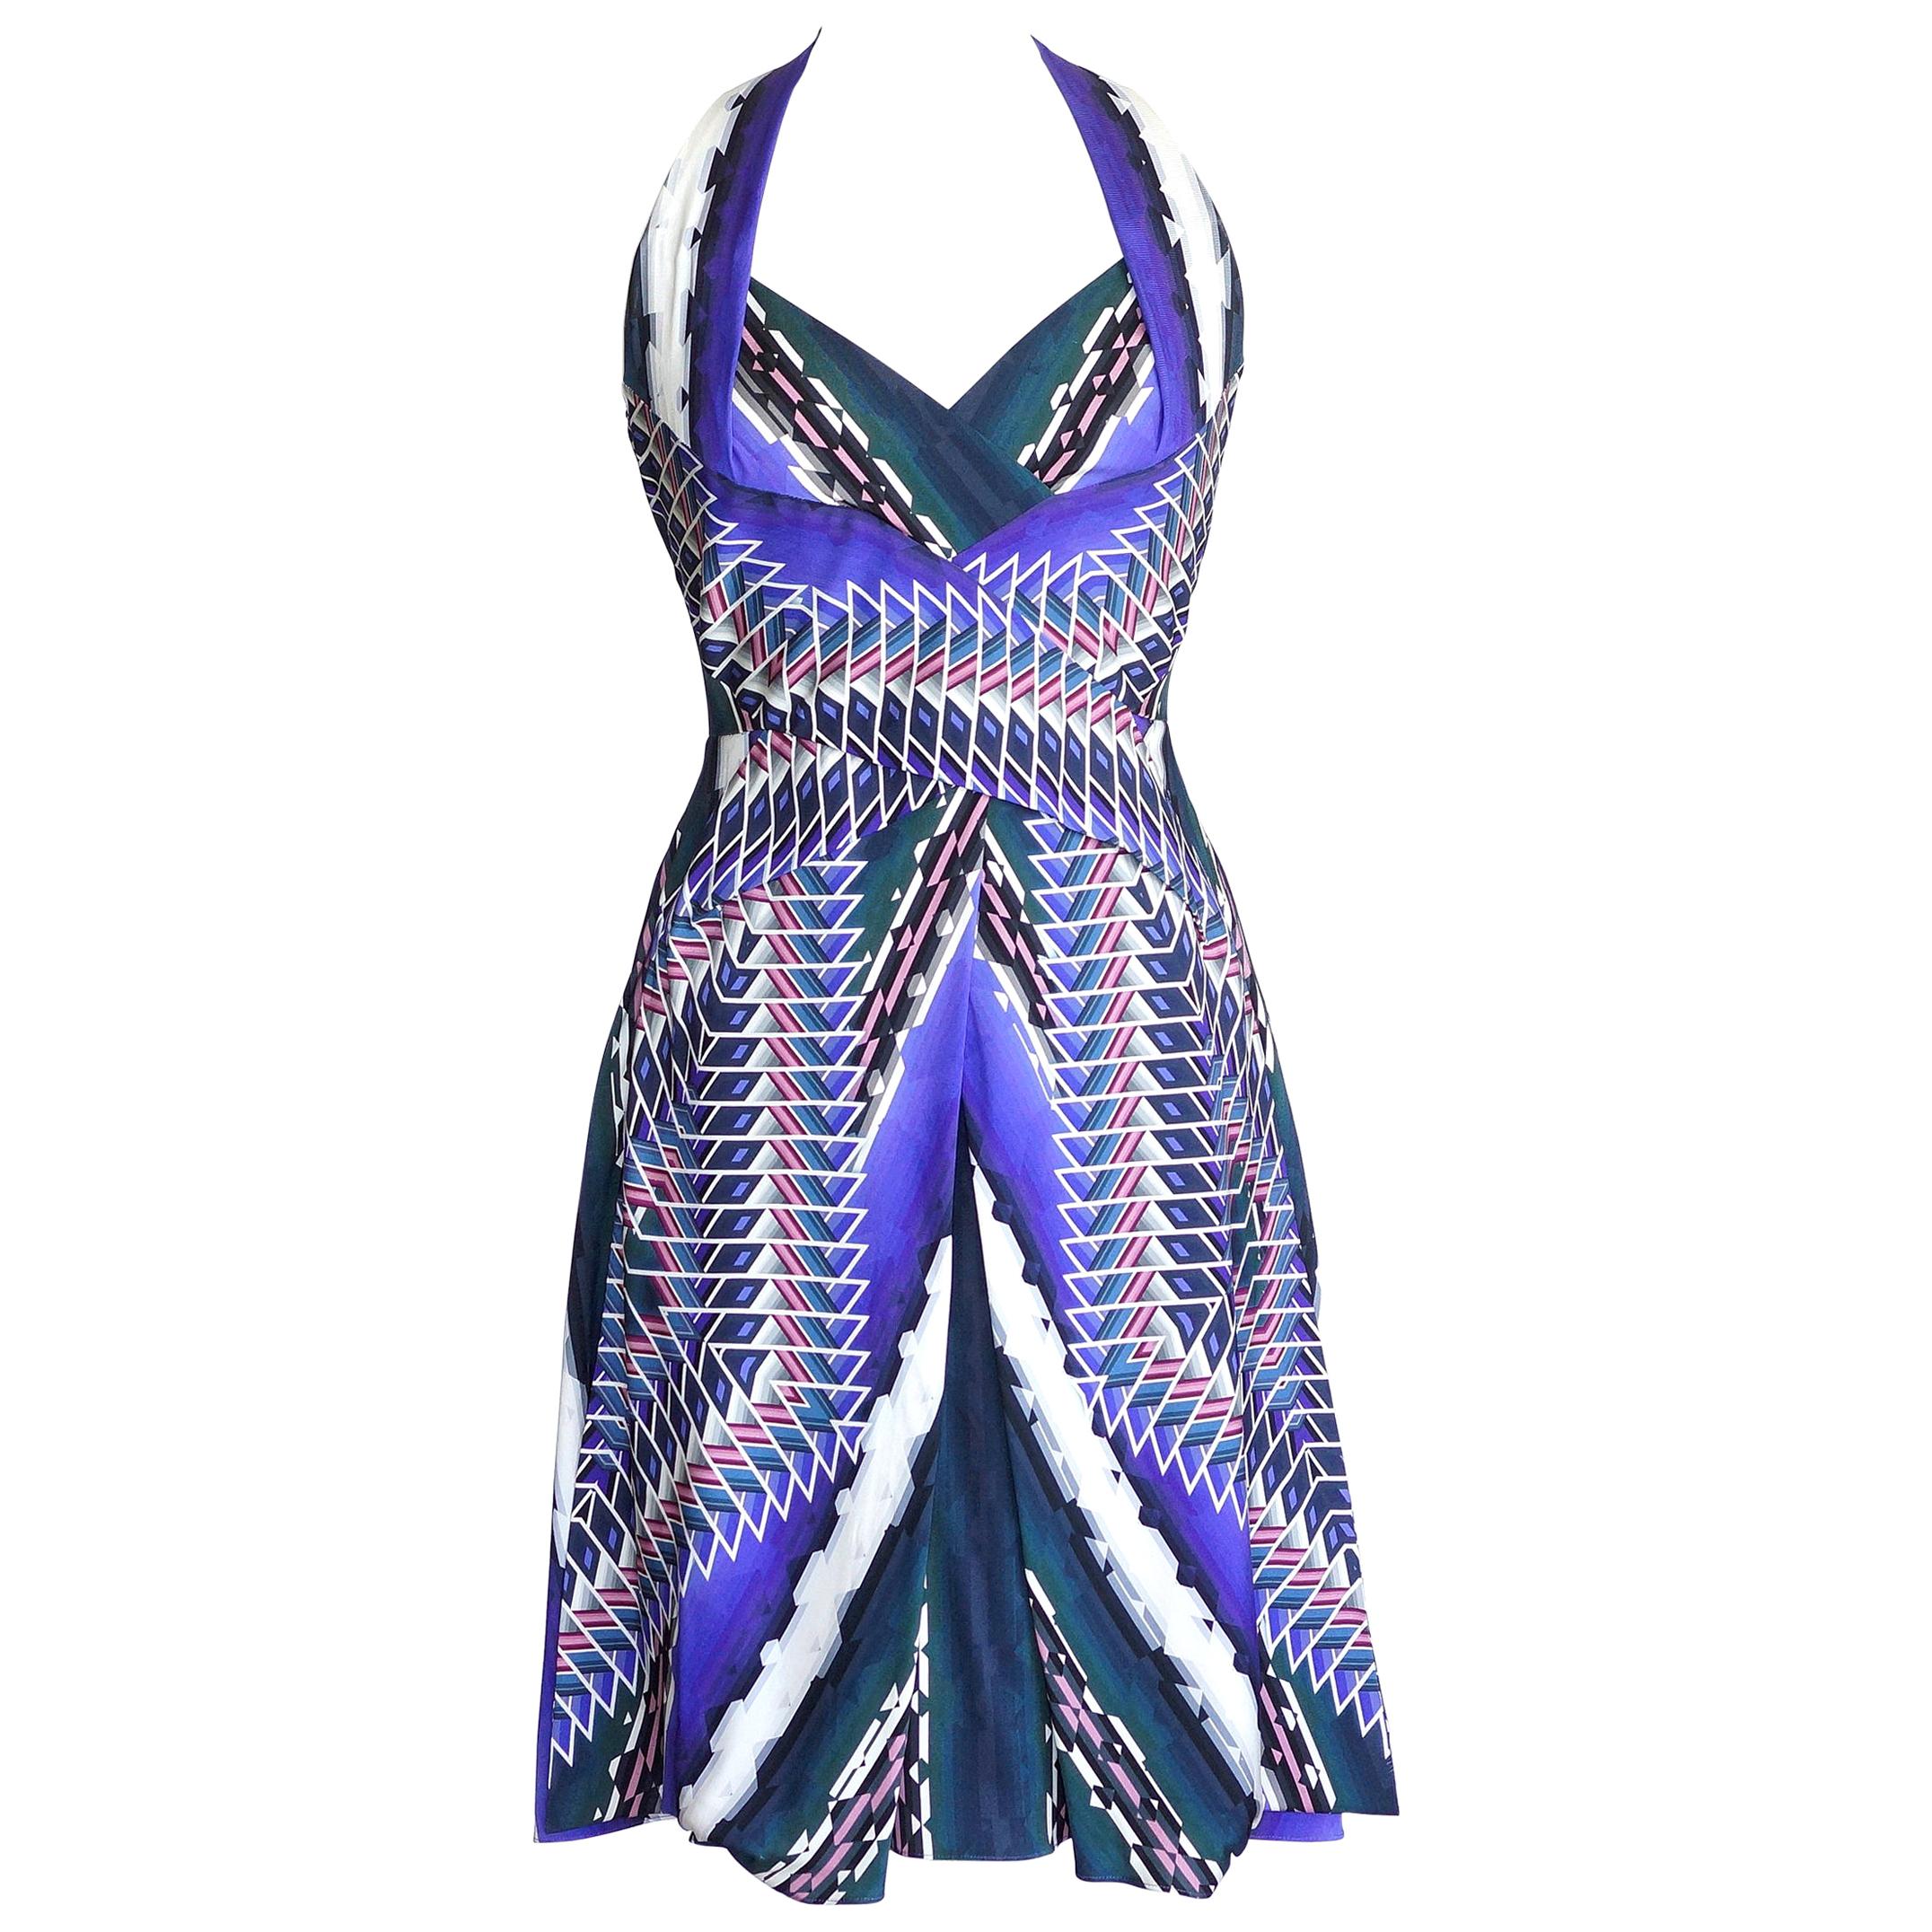 Peter Pilotto Dress Vivid Print Halter Style Beautiful Details  6  New w/ Tag For Sale